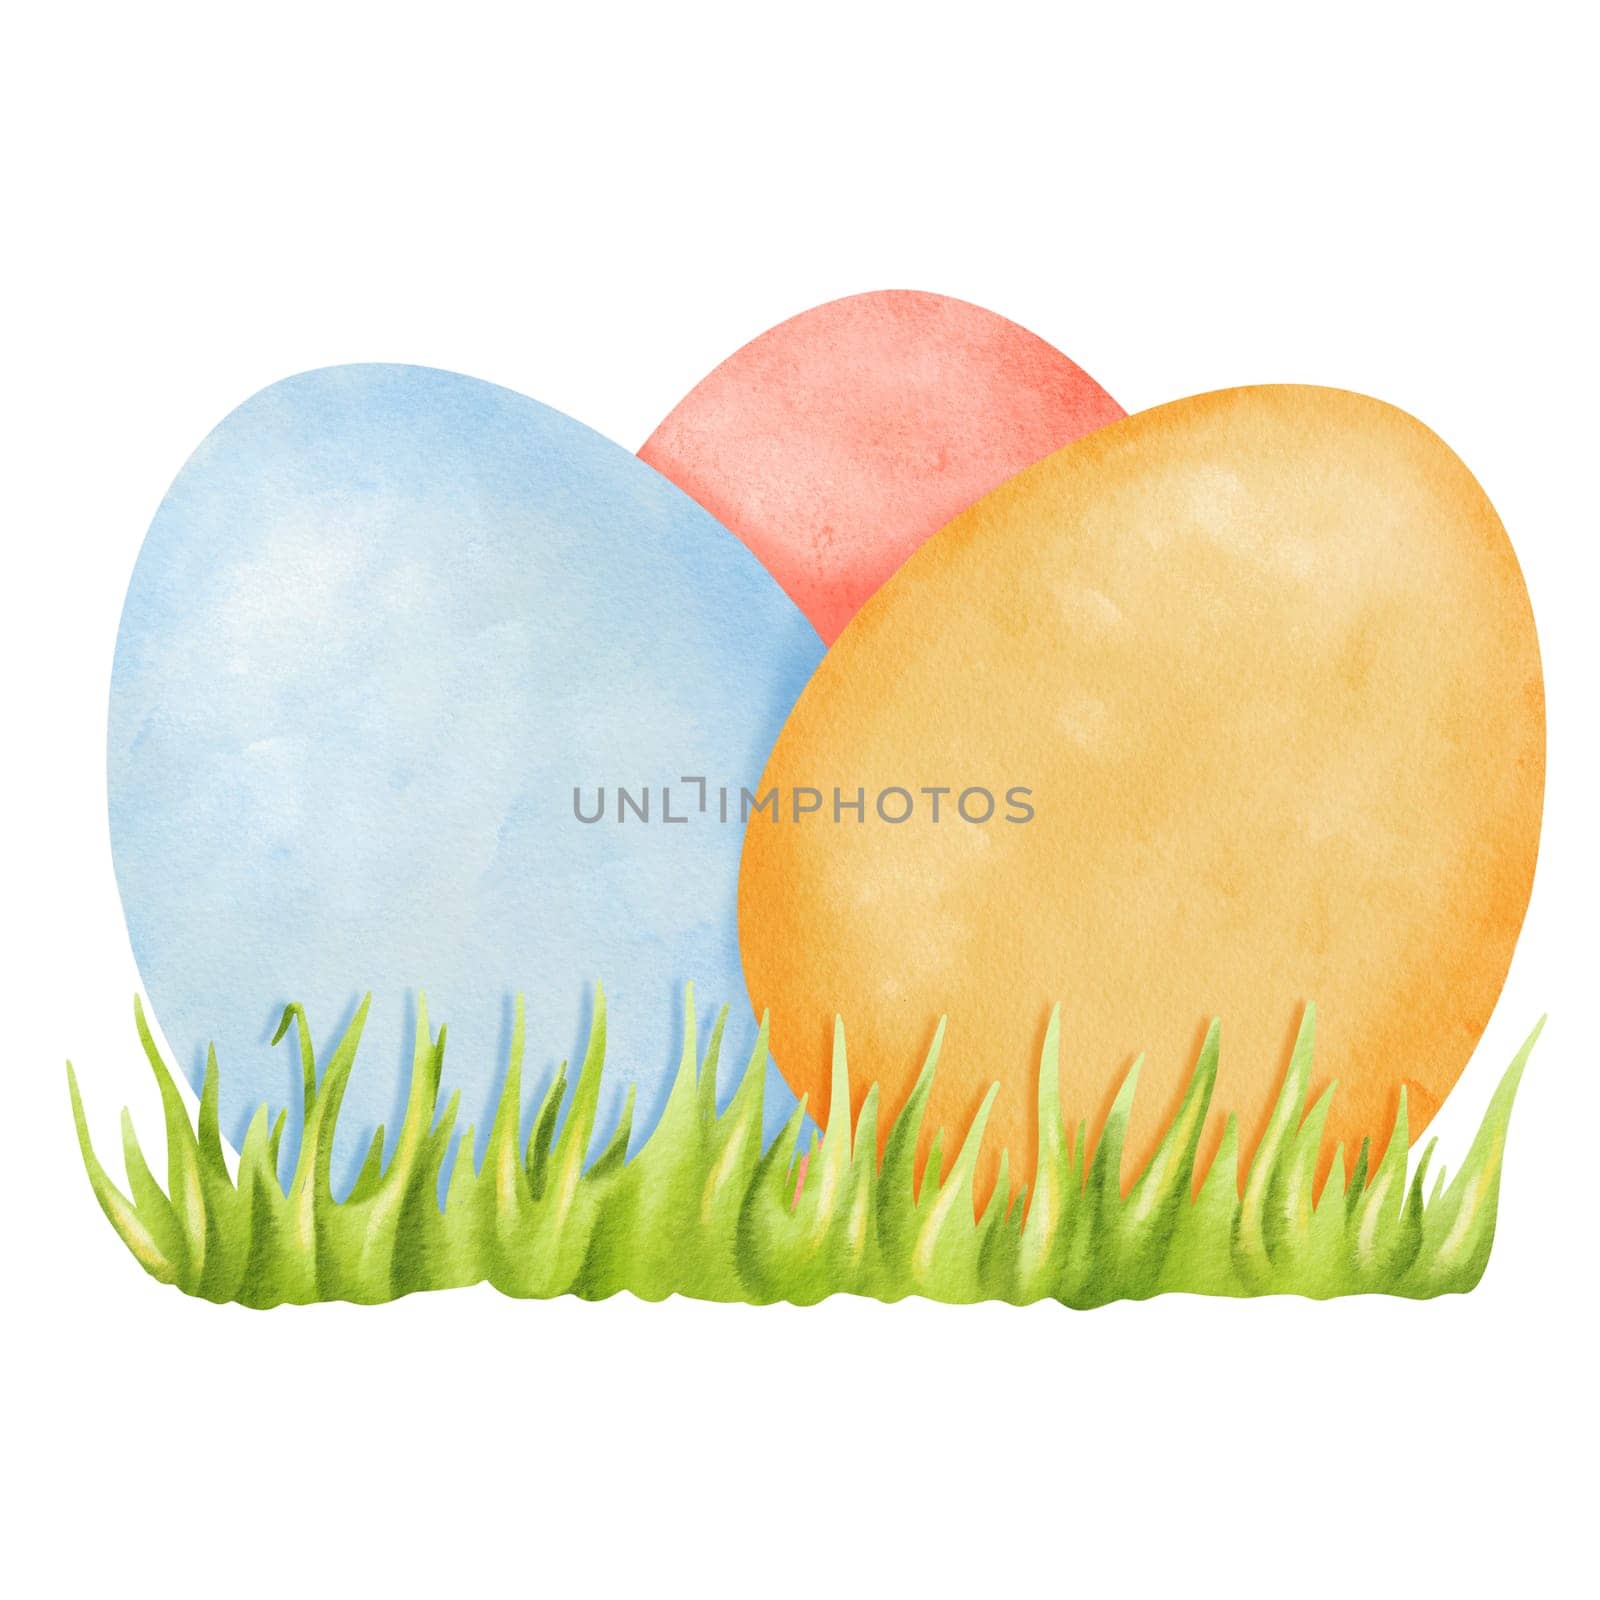 Easter composition featuring dyed colorful eggs on fresh green grass. Watercolor illustration with a childlike charm, for playful and festive designs, for children's illustrations, cards, and prints.